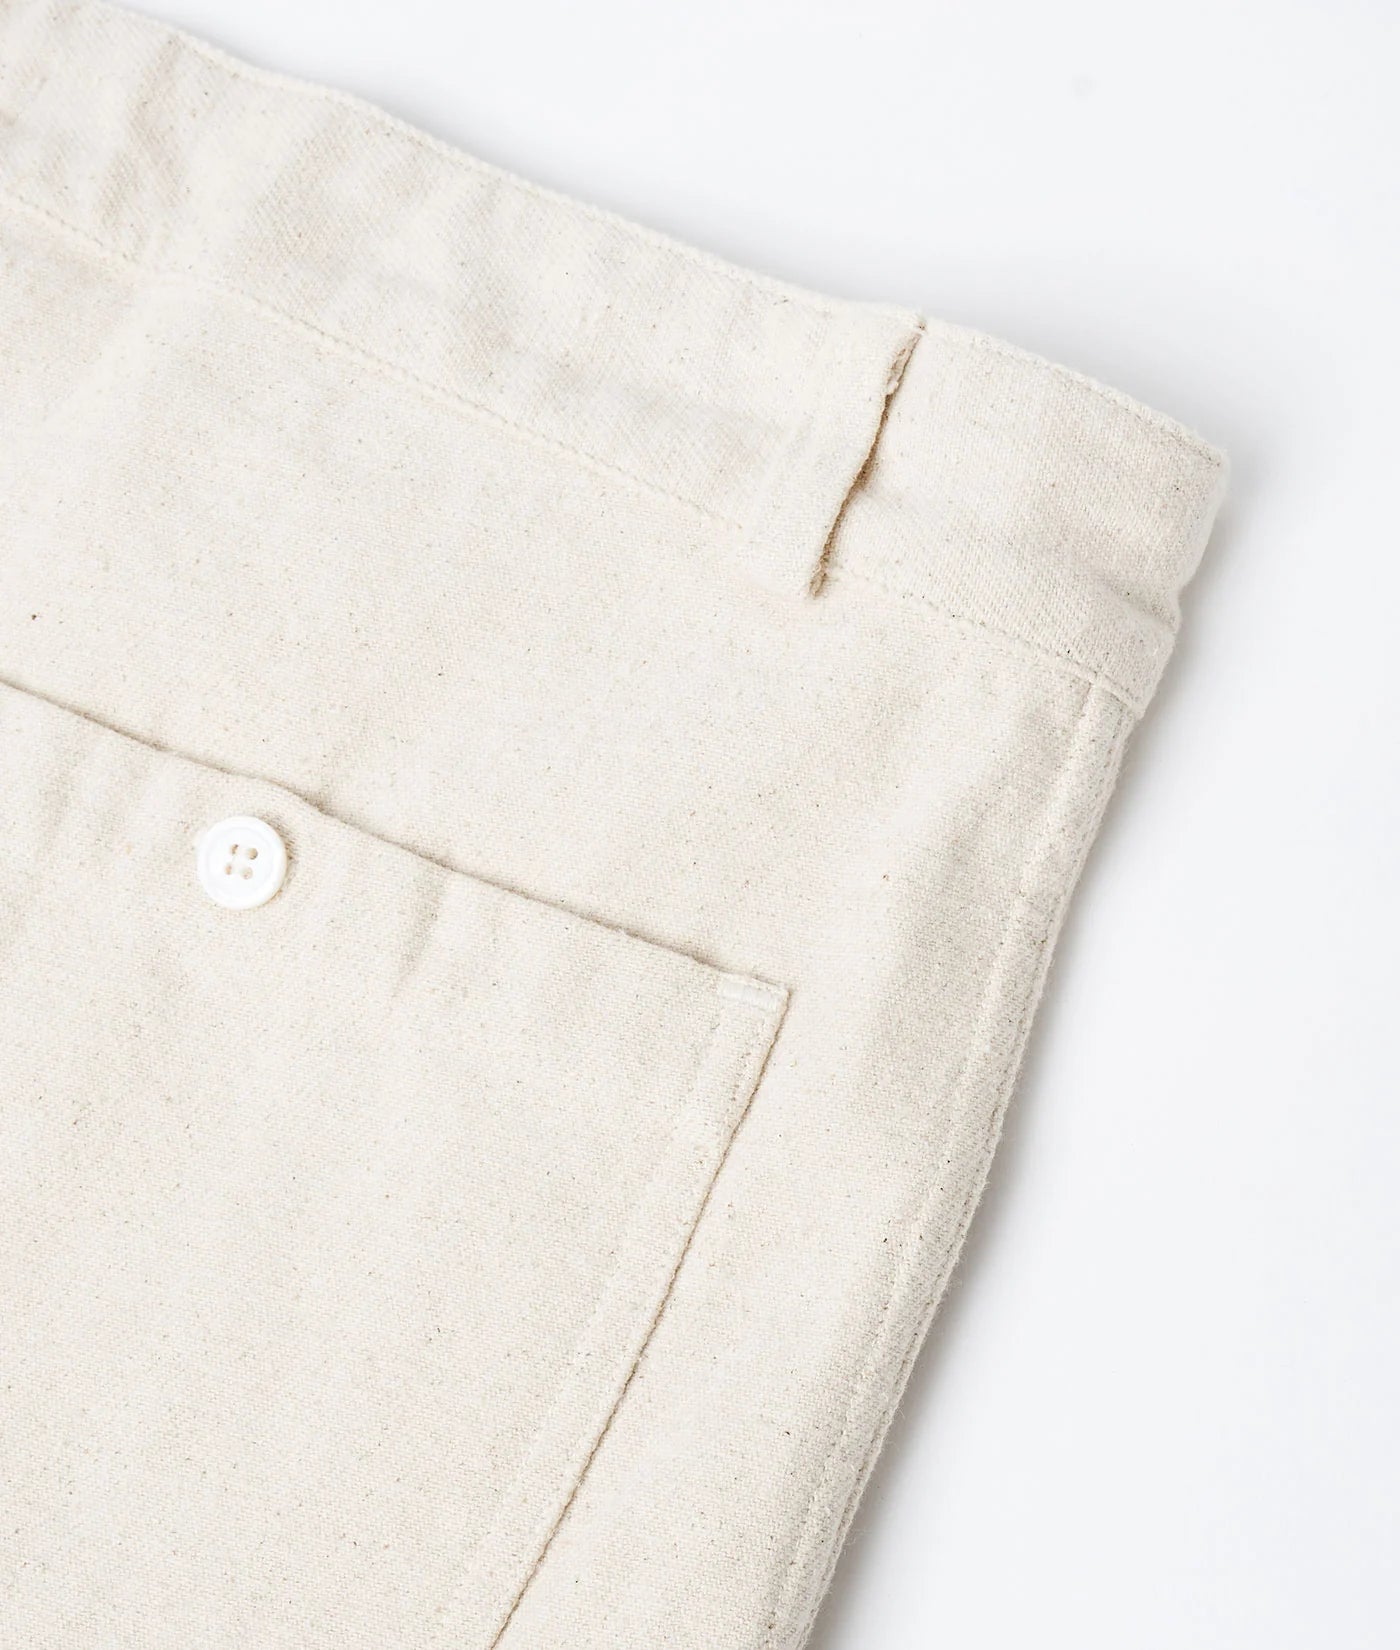 Industry of All Nations Clean Carpenter Pants, Undyed